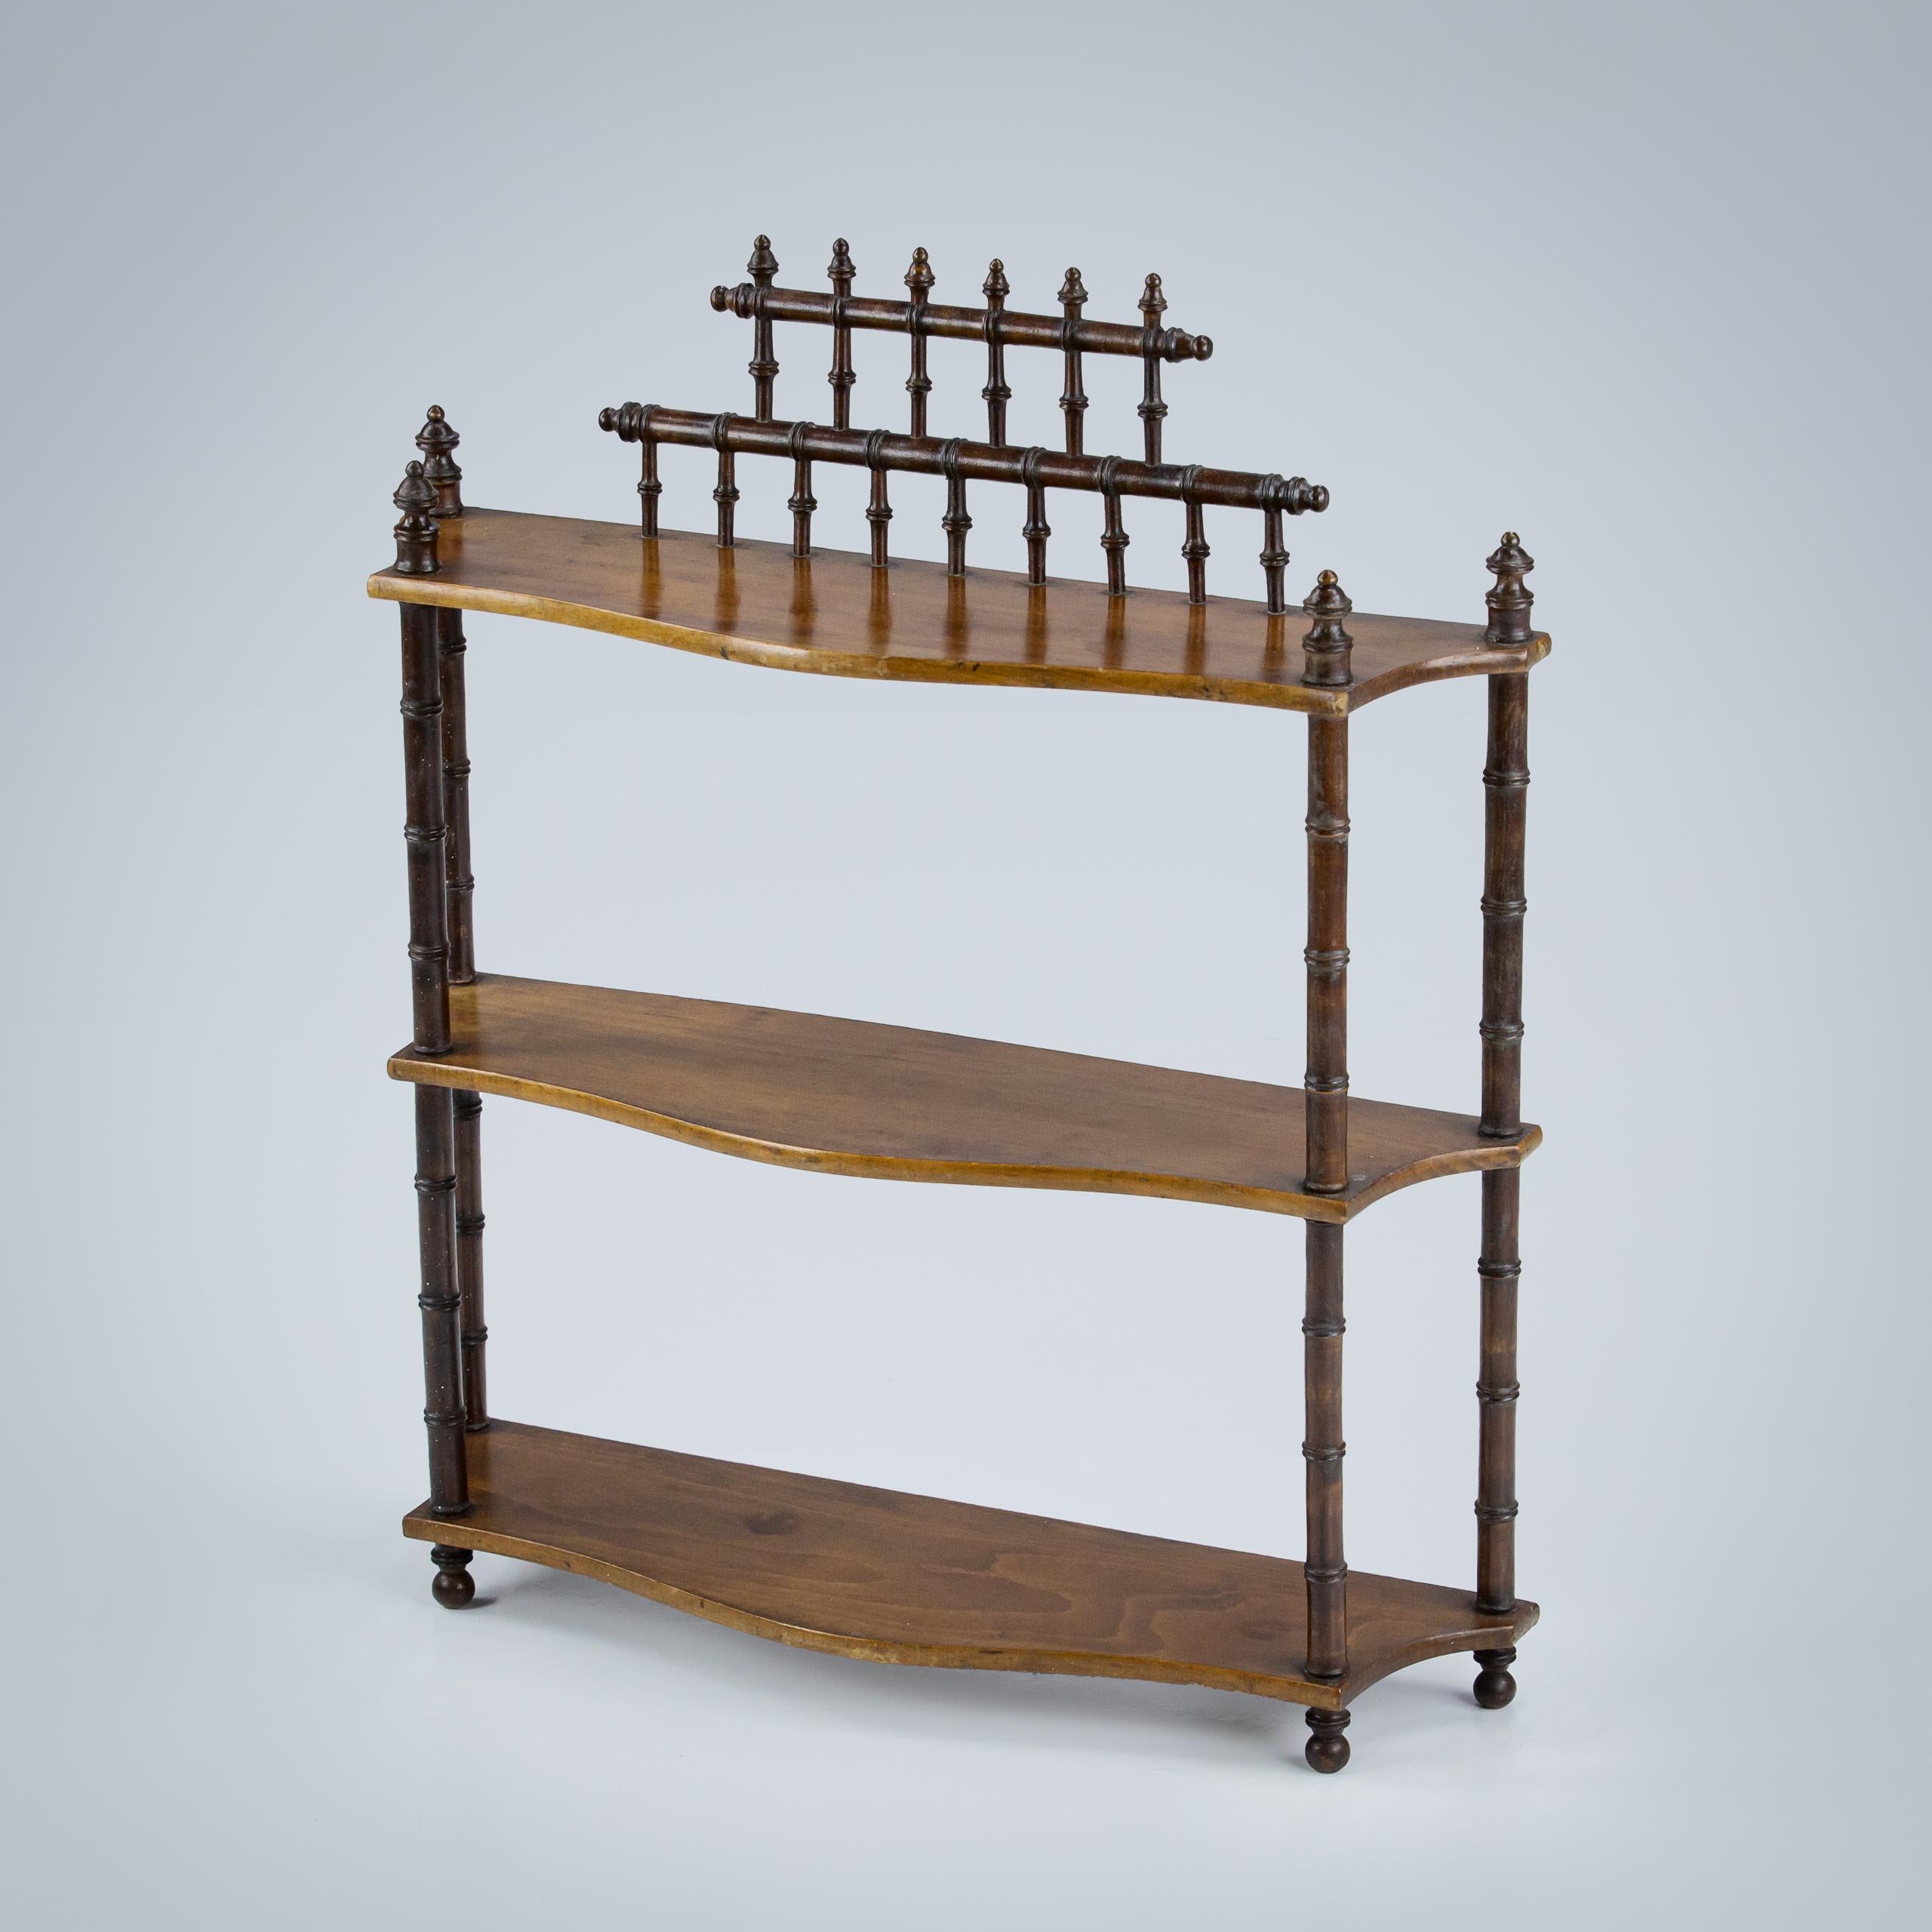 Early 20th Century simulated bamboo desktop or wall hanging shelf, serpentine shelves. Excellent condition and patination. France Circa 1900
